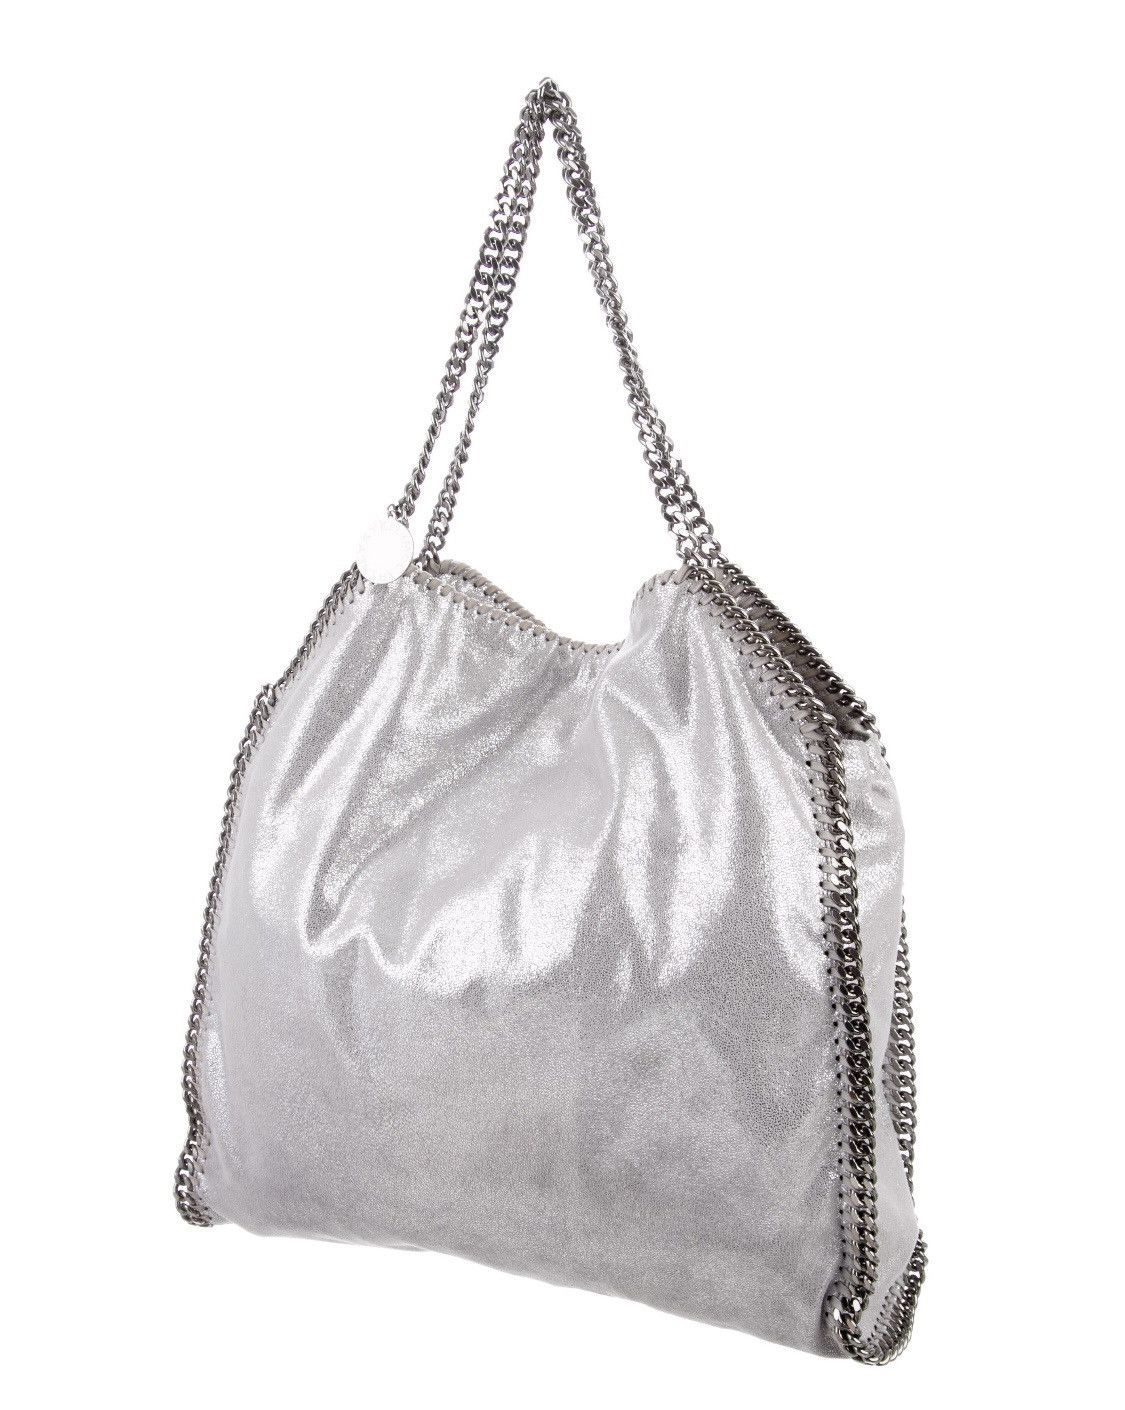 Stella McCartney Tote Size ONE SIZE - 2 Preview